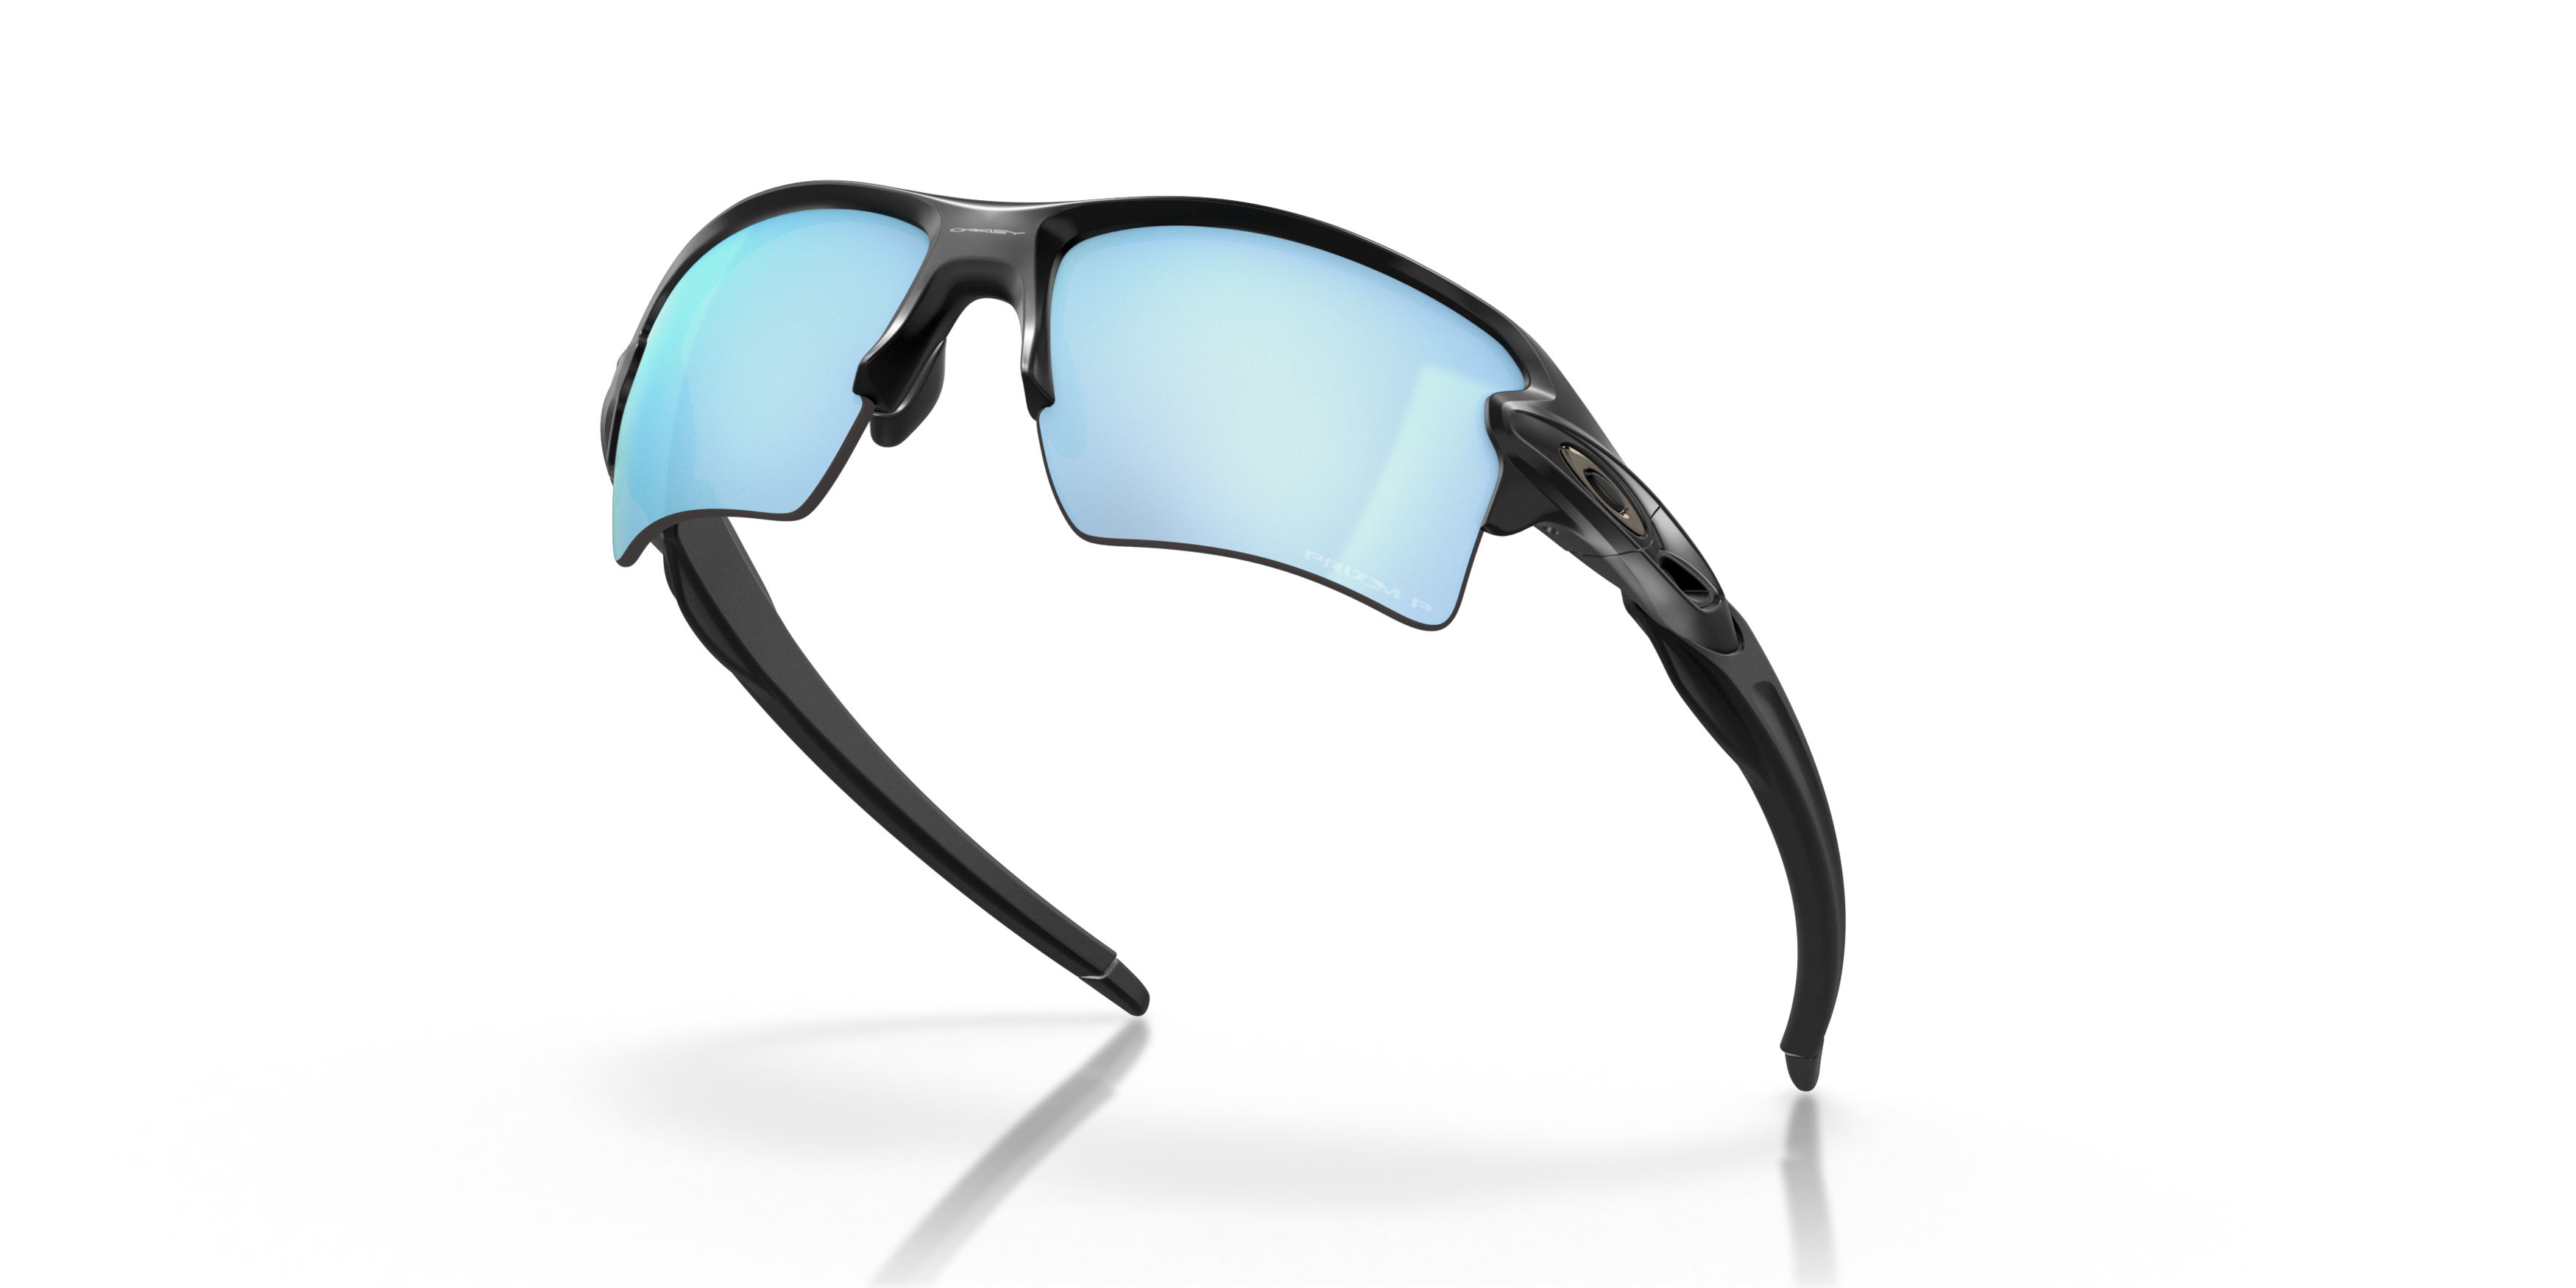 [products.image.bottom_up] Oakley FLAK 2.0 XL OO9188 918858